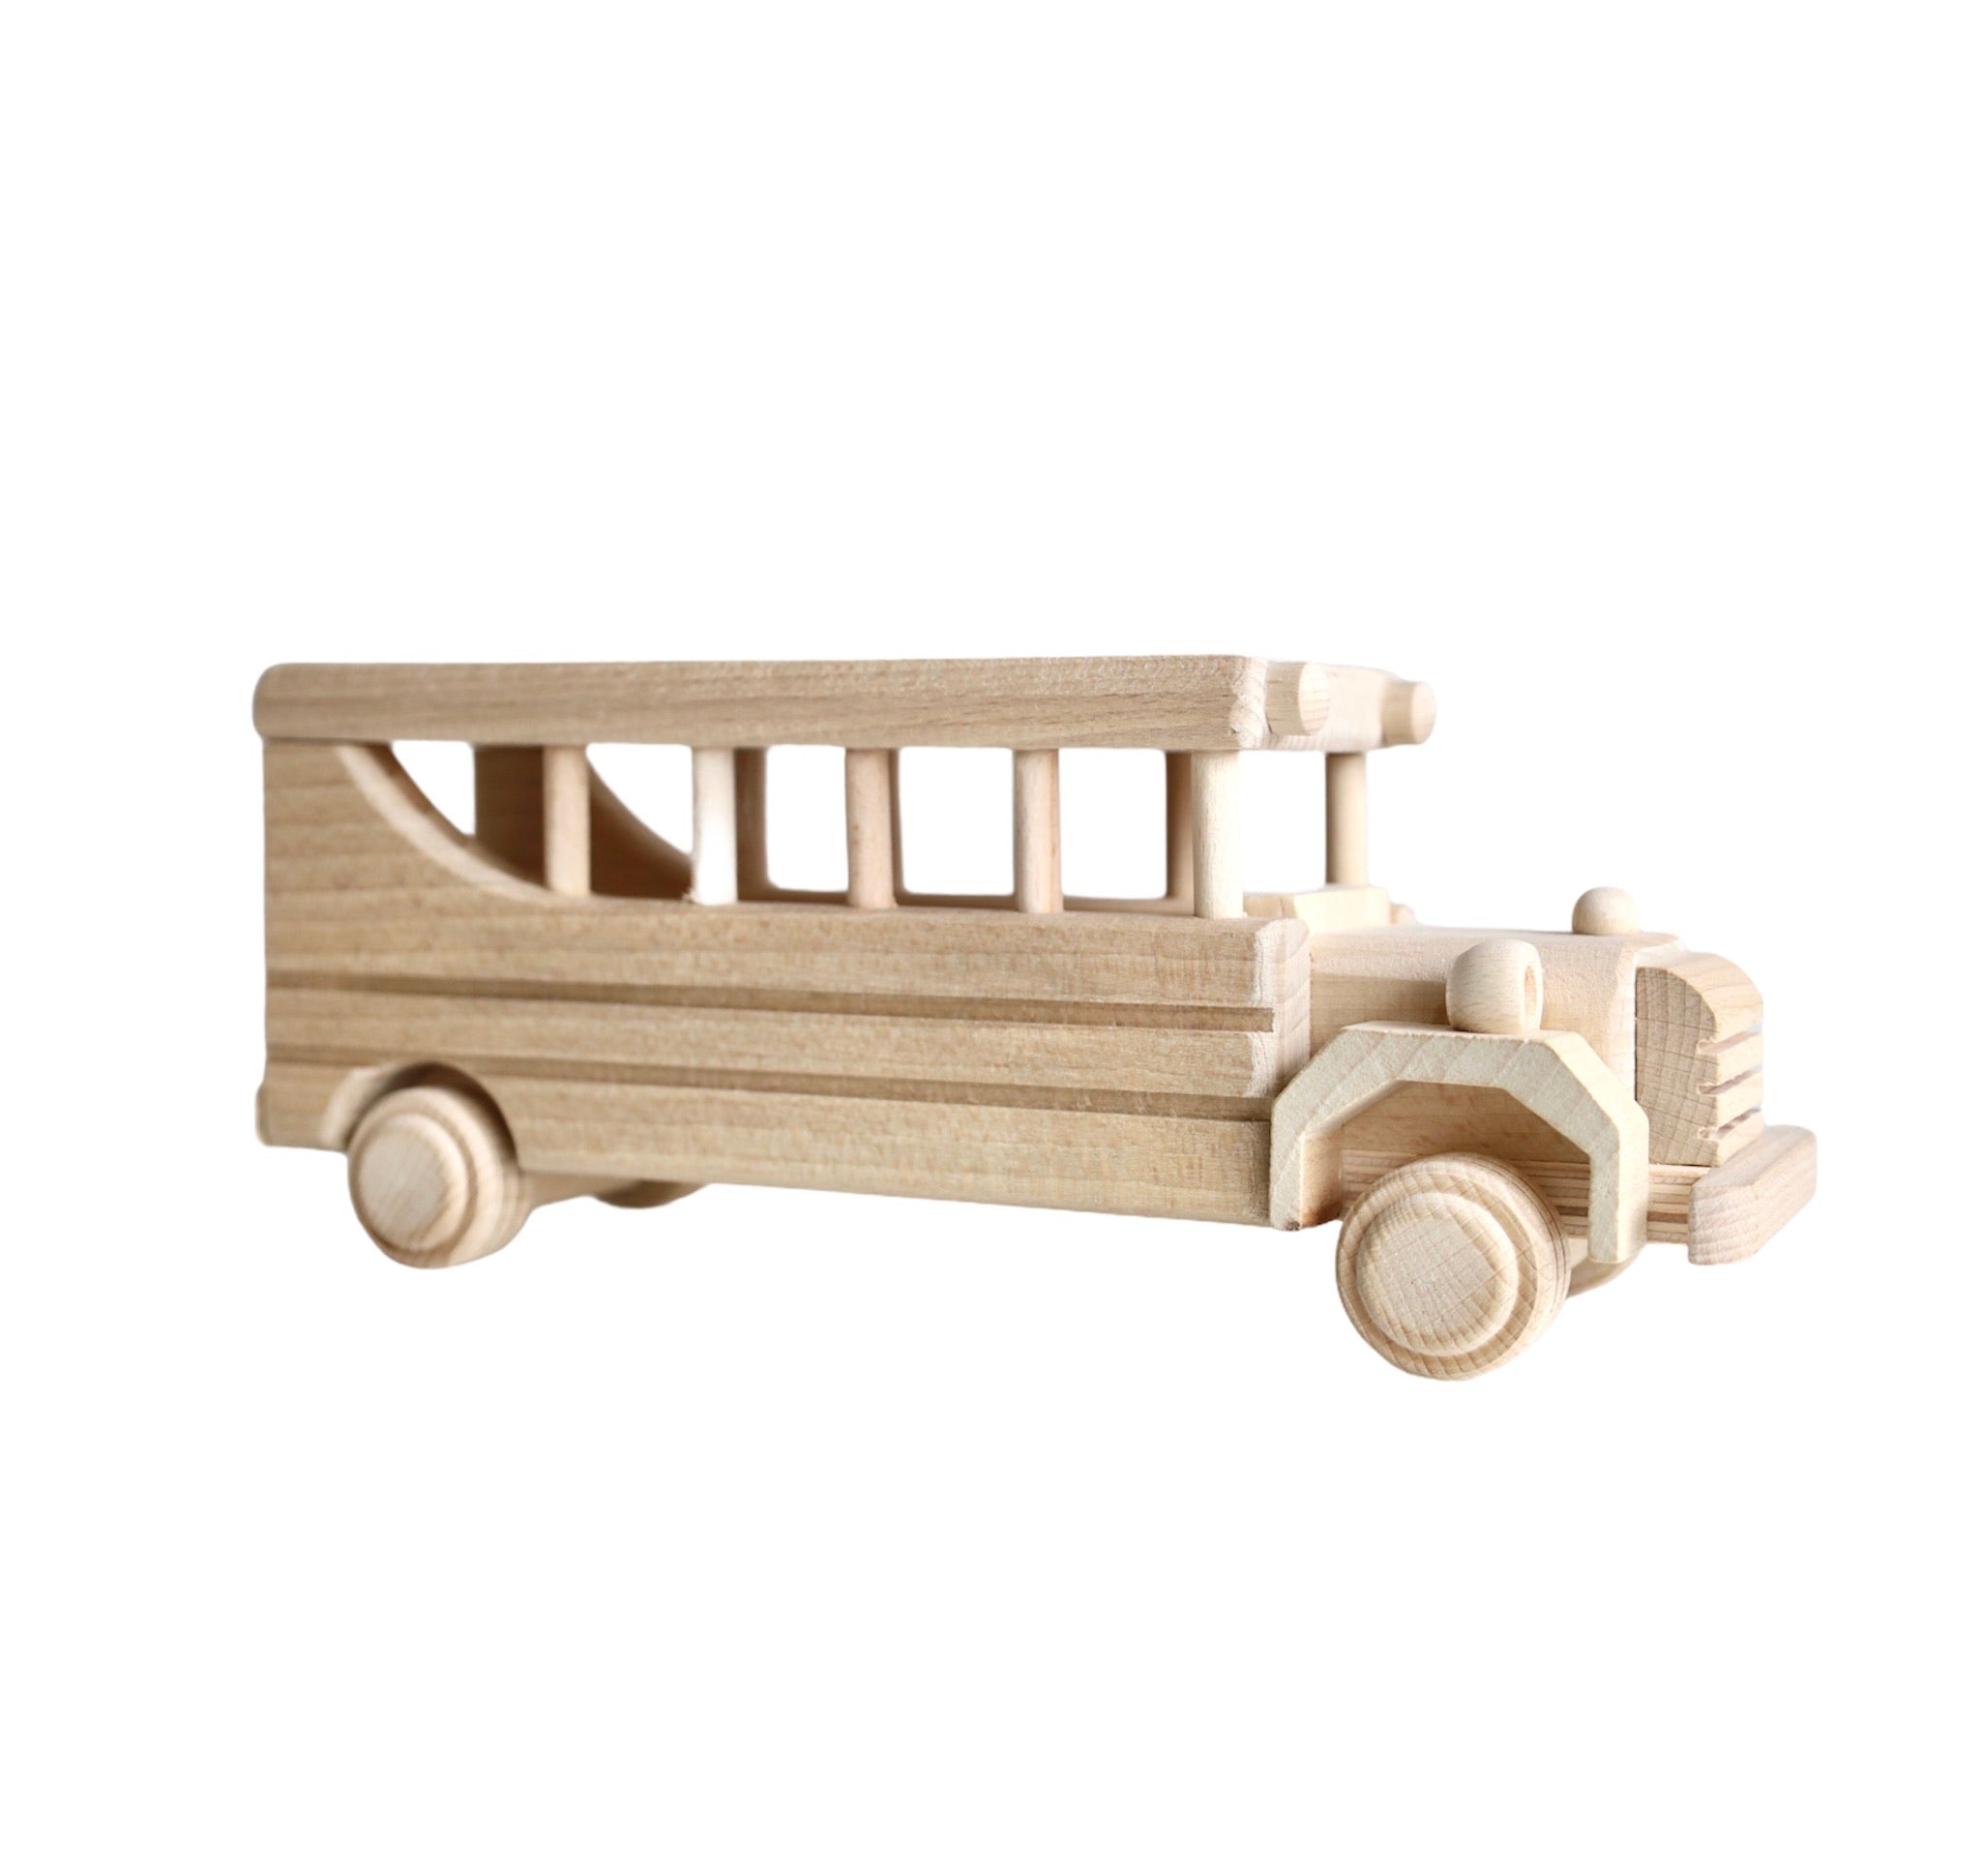 Bus - wooden toy